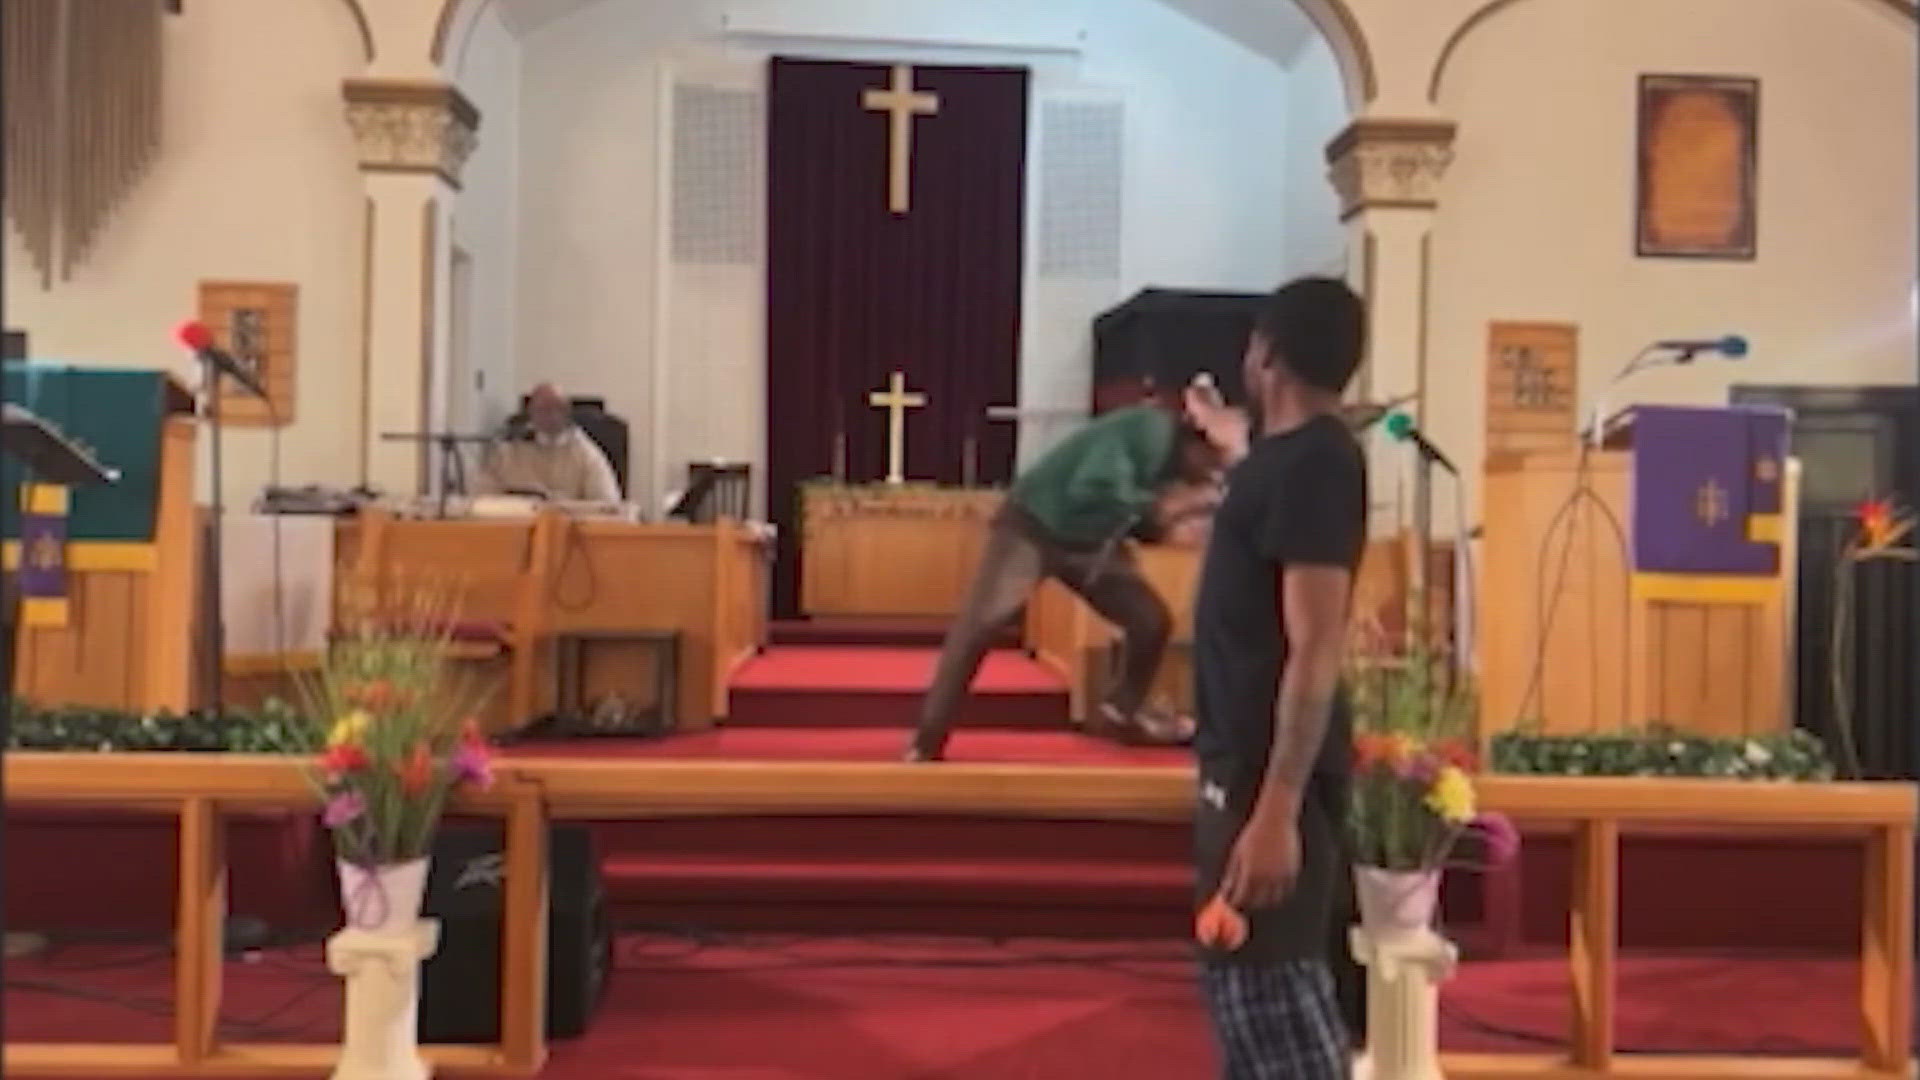 A shocking moment was caught on video yesterday when a man pulled a gun on a pastor in the middle of his sermon in North Braddock, Pennsylvania.